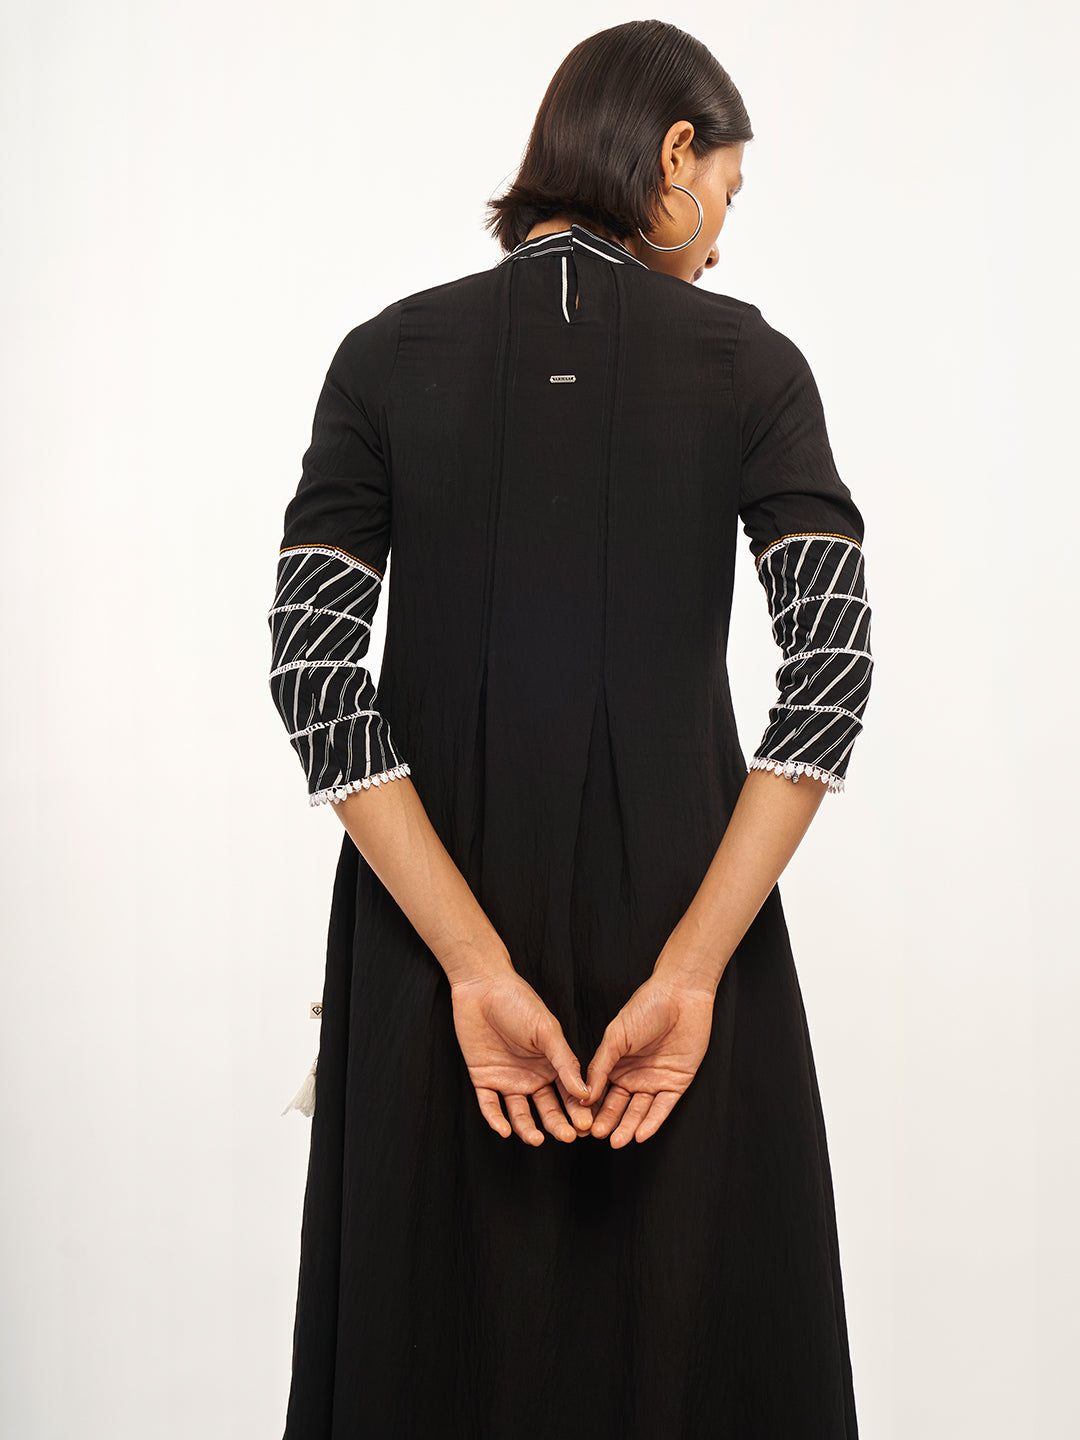 Embroidered Black Flared Dress - ARH151